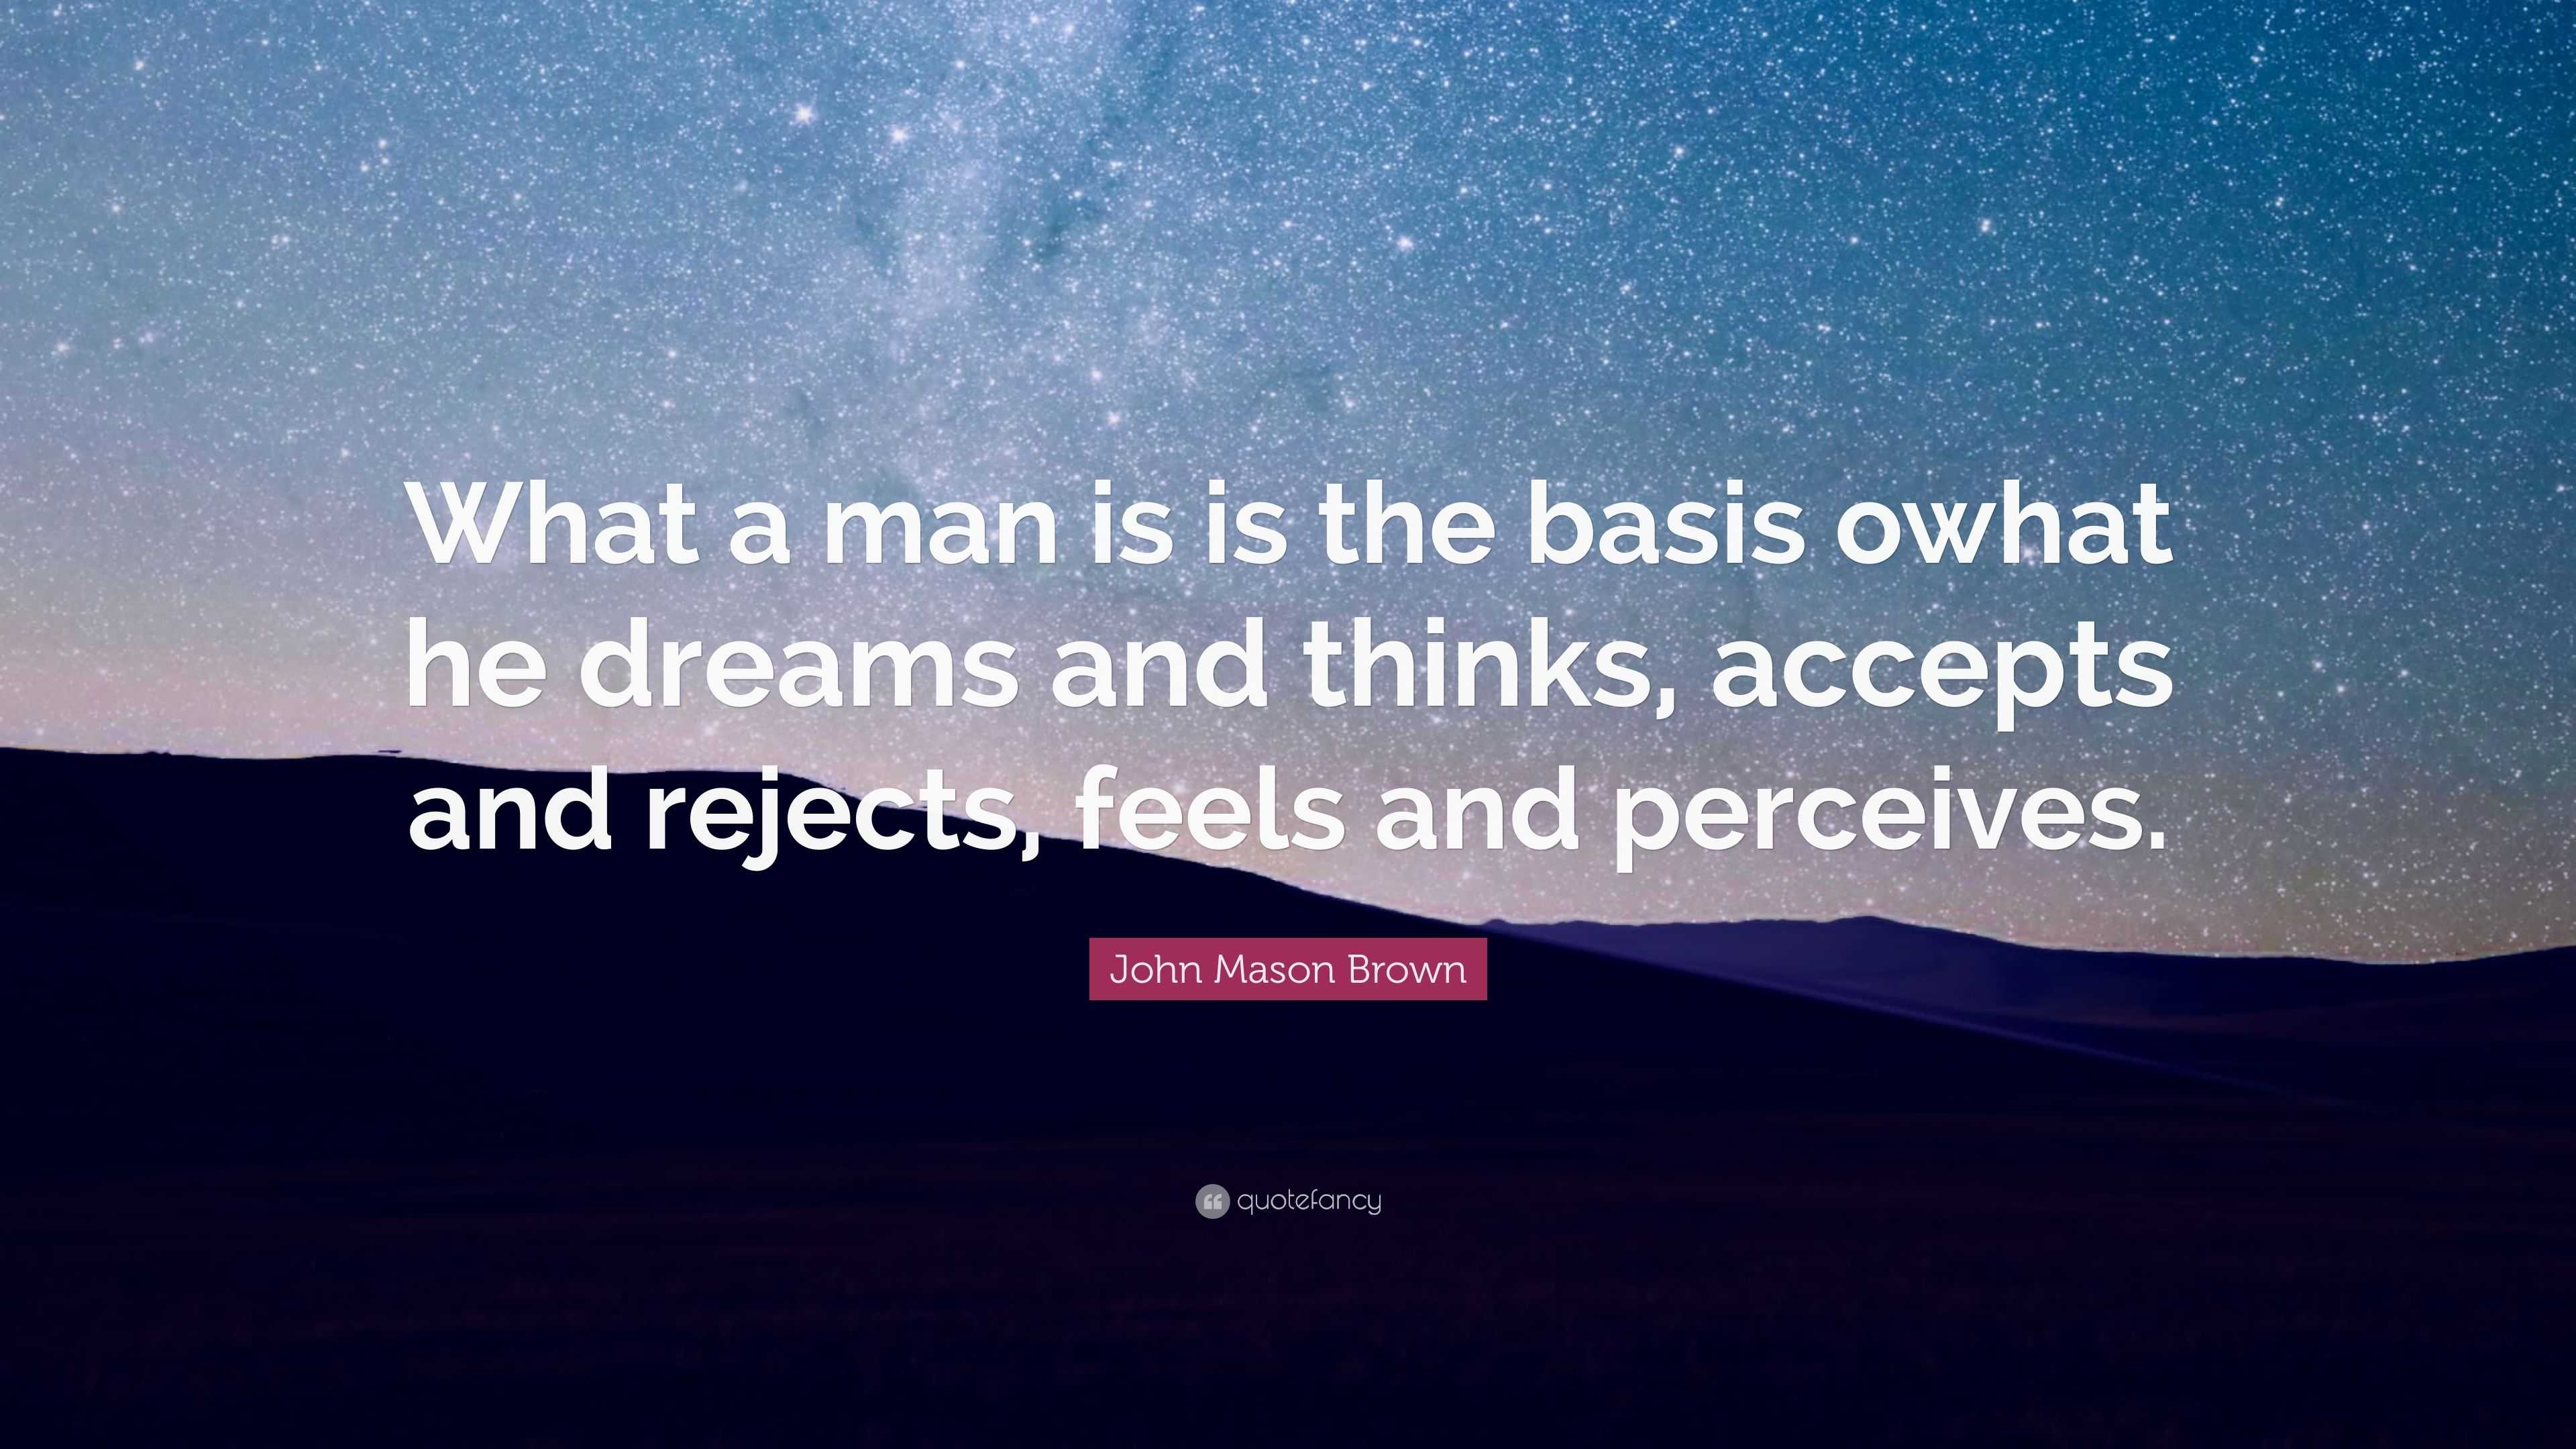 John Mason Brown Quote: “What a man is is the basis owhat he dreams and ...